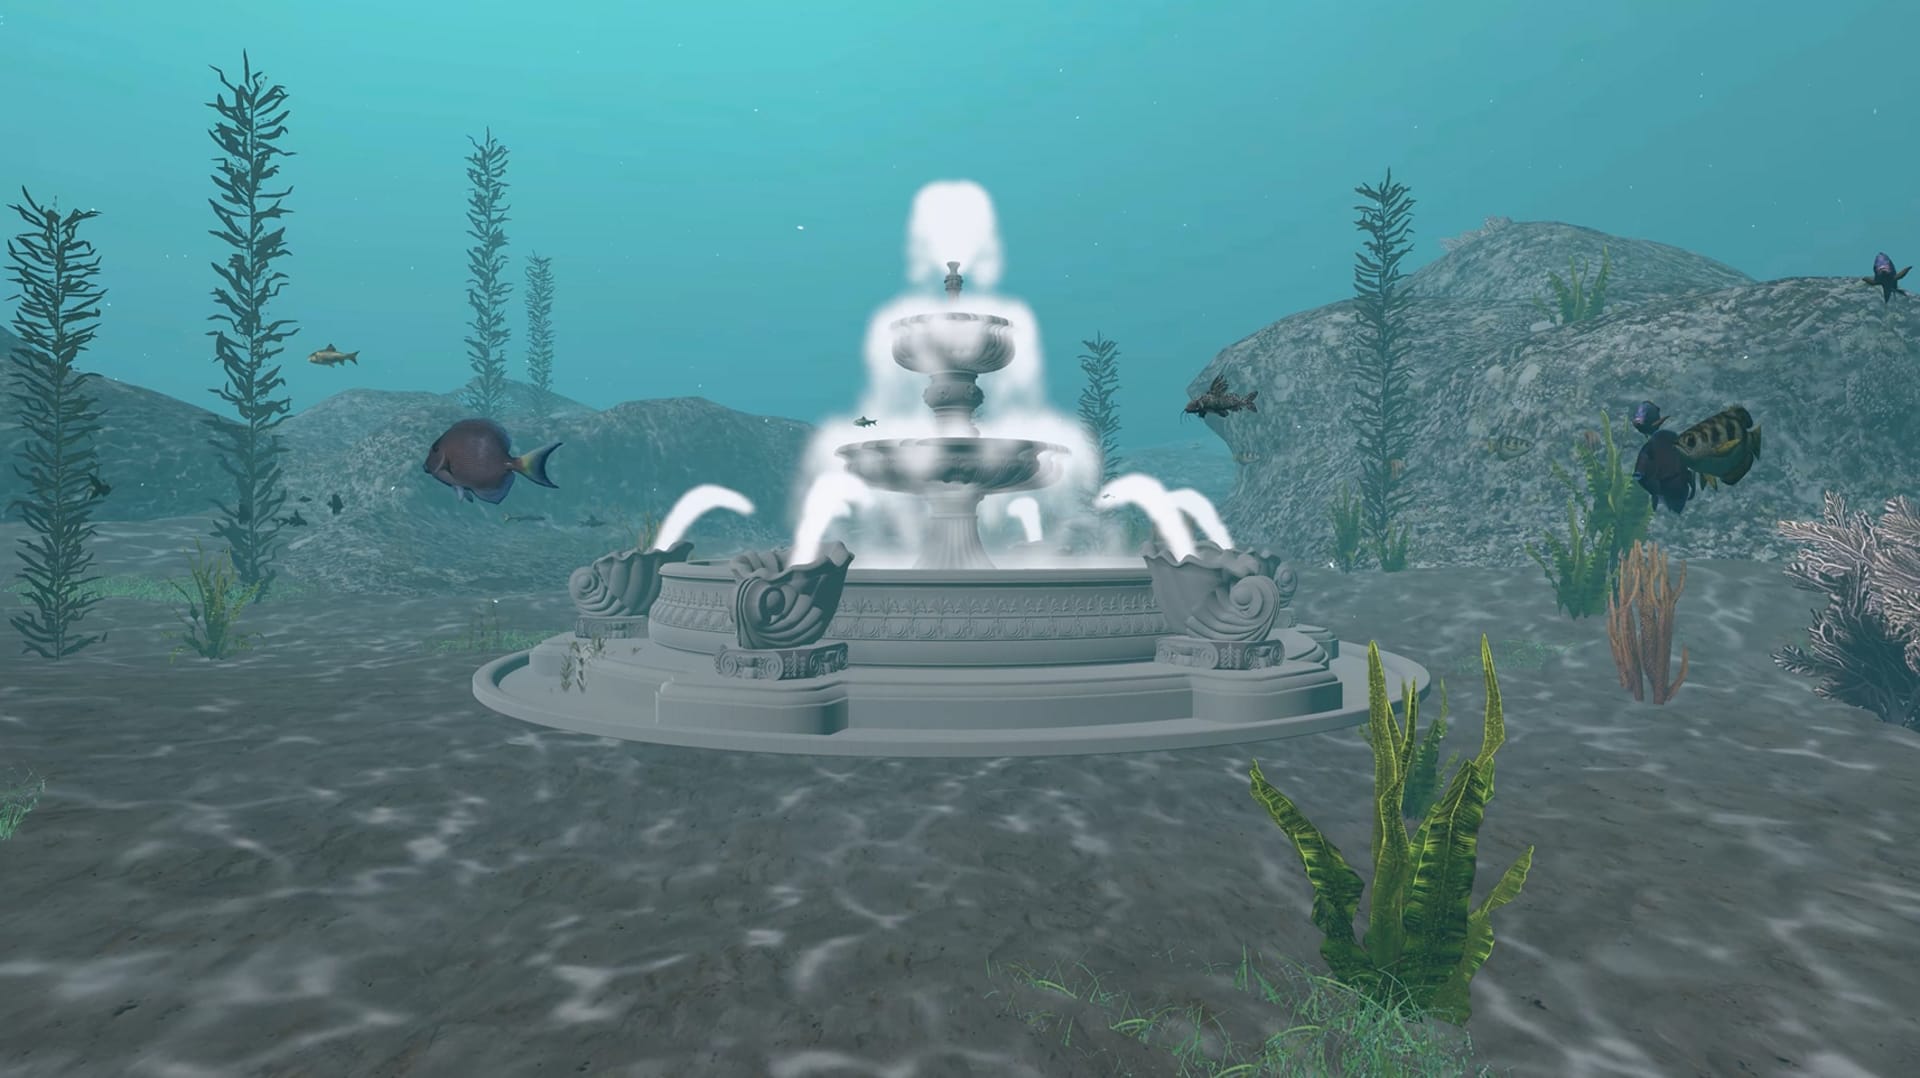 The image contains an underwater fountain and a school of swimming fish.